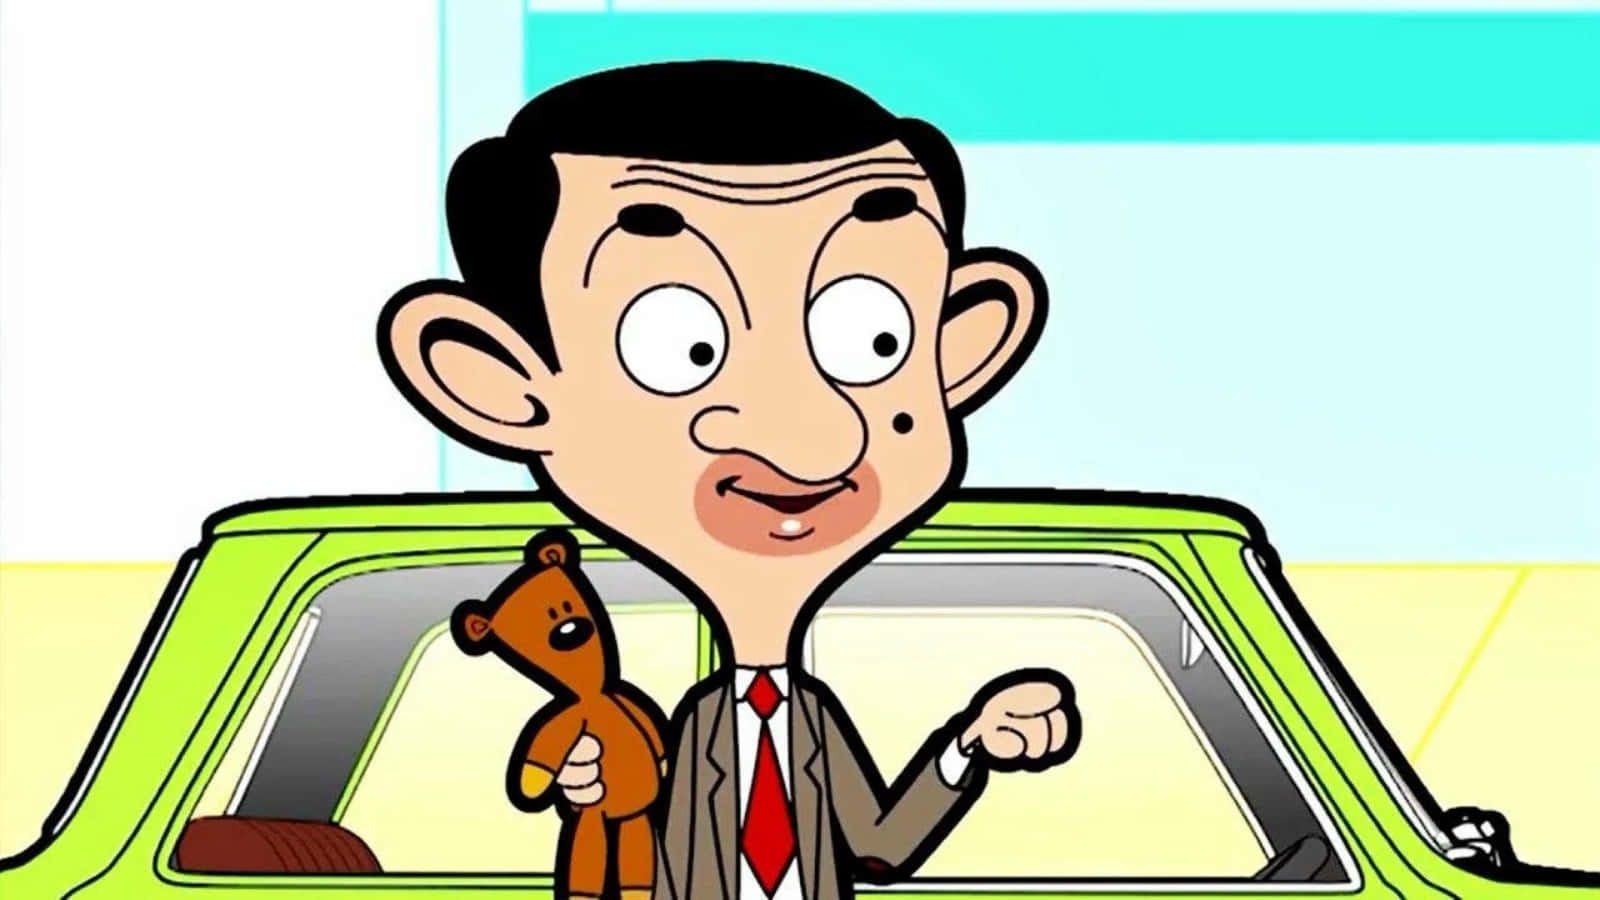 Mr. Bean's Quirky Smile